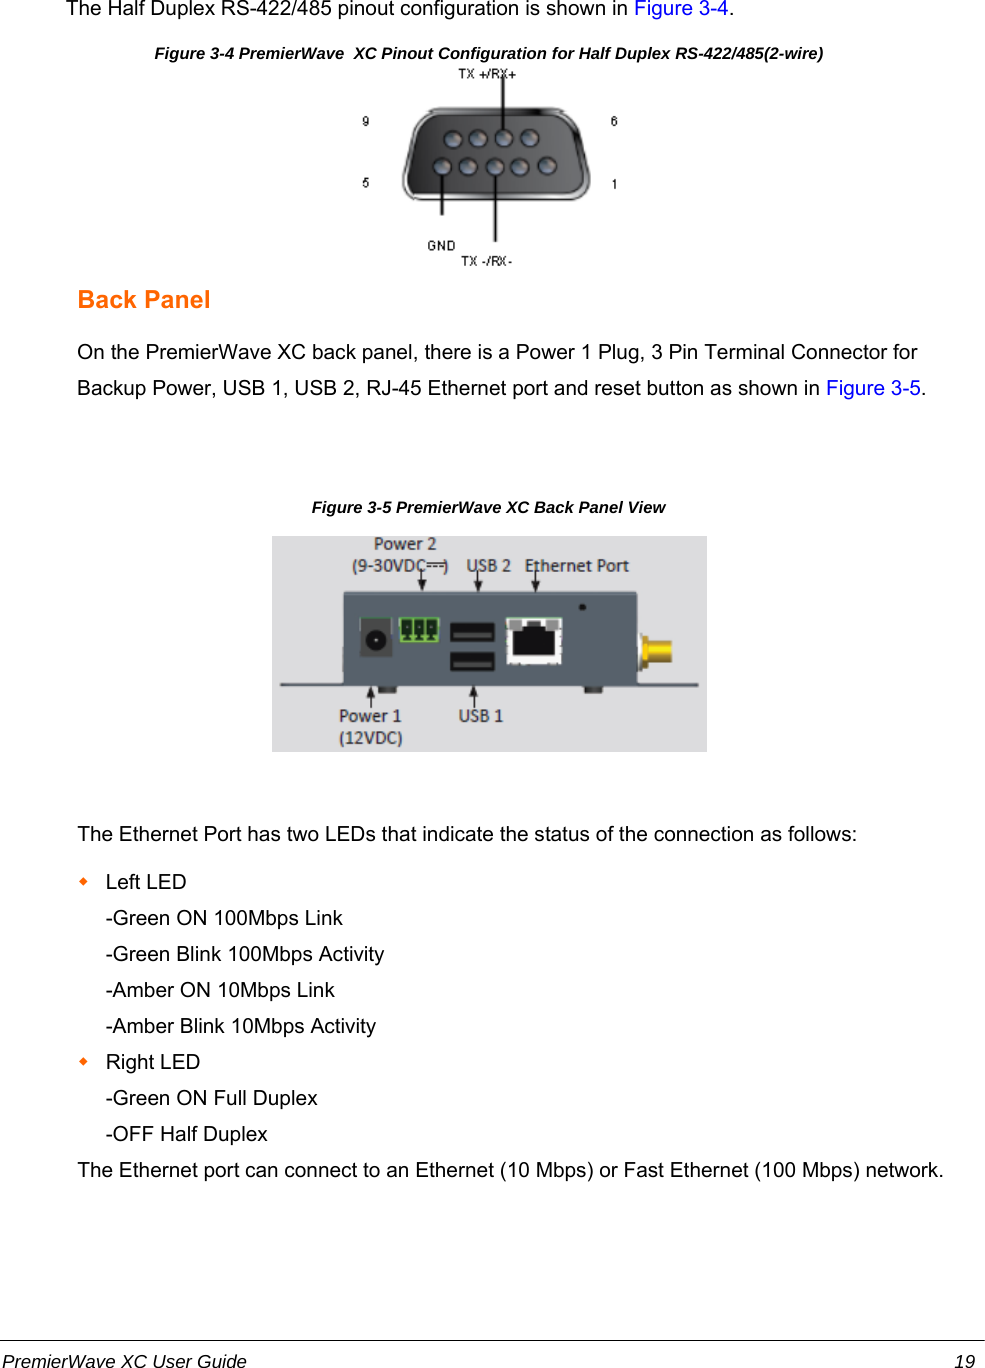                         The Half Duplex RS-422/485 pinout configuration is shown in Figure 3-4.Figure 3-4 PremierWave  XC Pinout Configuration for Half Duplex RS-422/485(2-wire)Back PanelOn the PremierWave XC back panel, there is a Power 1 Plug, 3 Pin Terminal Connector forBackup Power, USB 1, USB 2, RJ-45 Ethernet port and reset button as shown in Figure 3-5.Figure 3-5 PremierWave XC Back Panel ViewThe Ethernet Port has two LEDs that indicate the status of the connection as follows:Left LED-Green ON 100Mbps Link-Green Blink 100Mbps Activity-Amber ON 10Mbps Link-Amber Blink 10Mbps ActivityRight LED-Green ON Full Duplex-OFF Half DuplexThe Ethernet port can connect to an Ethernet (10 Mbps) or Fast Ethernet (100 Mbps) network.PremierWave XC User Guide 19